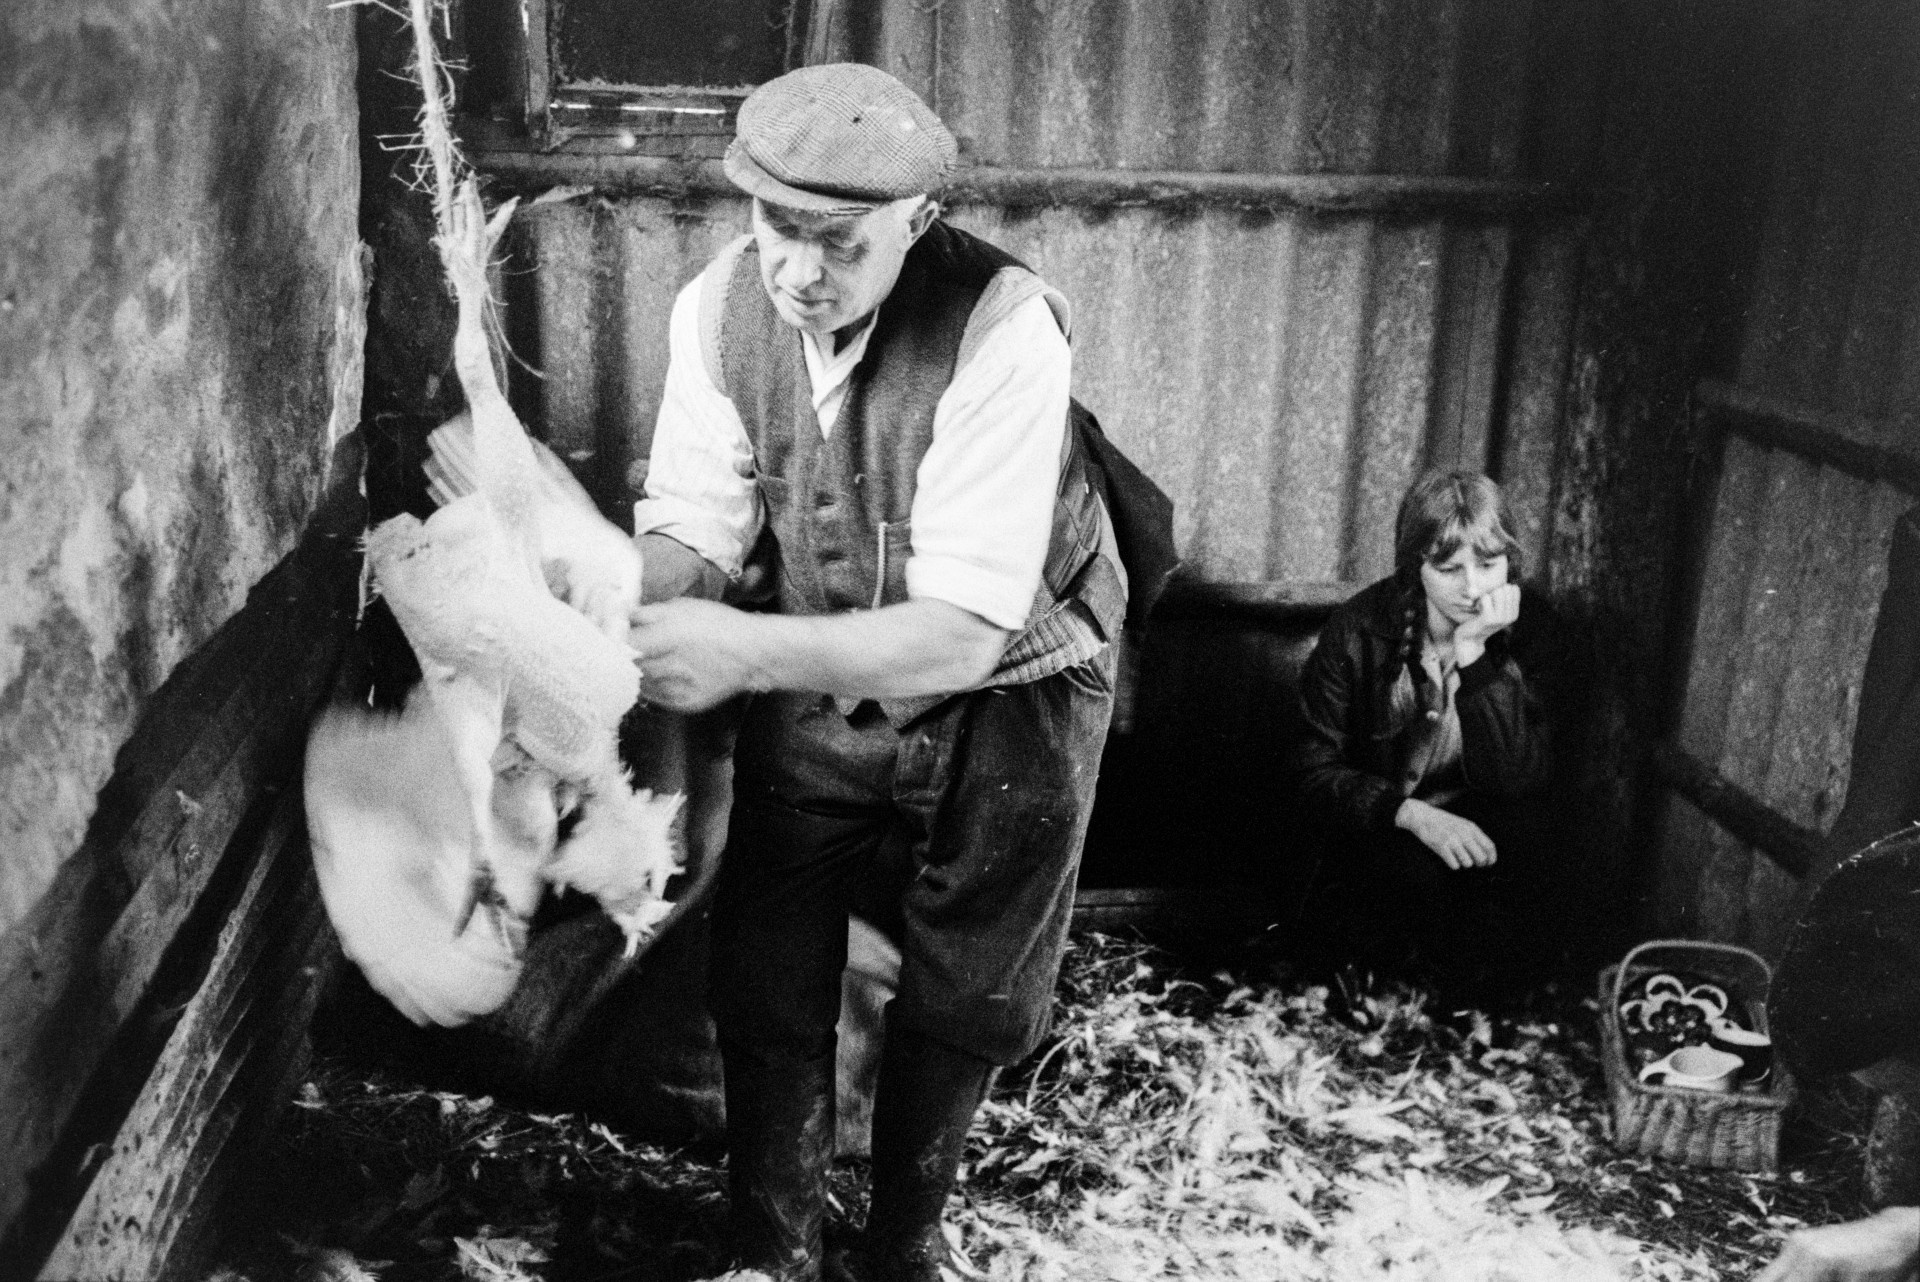 Tom Hooper plucking a chicken in a corrugated iron shed at Mill Road Farm, Beaford, while a woman waits to take the chickens to the farmhouse in the background. A basket with cups is on the floor beside her. The farm was also known as Jeffrys.